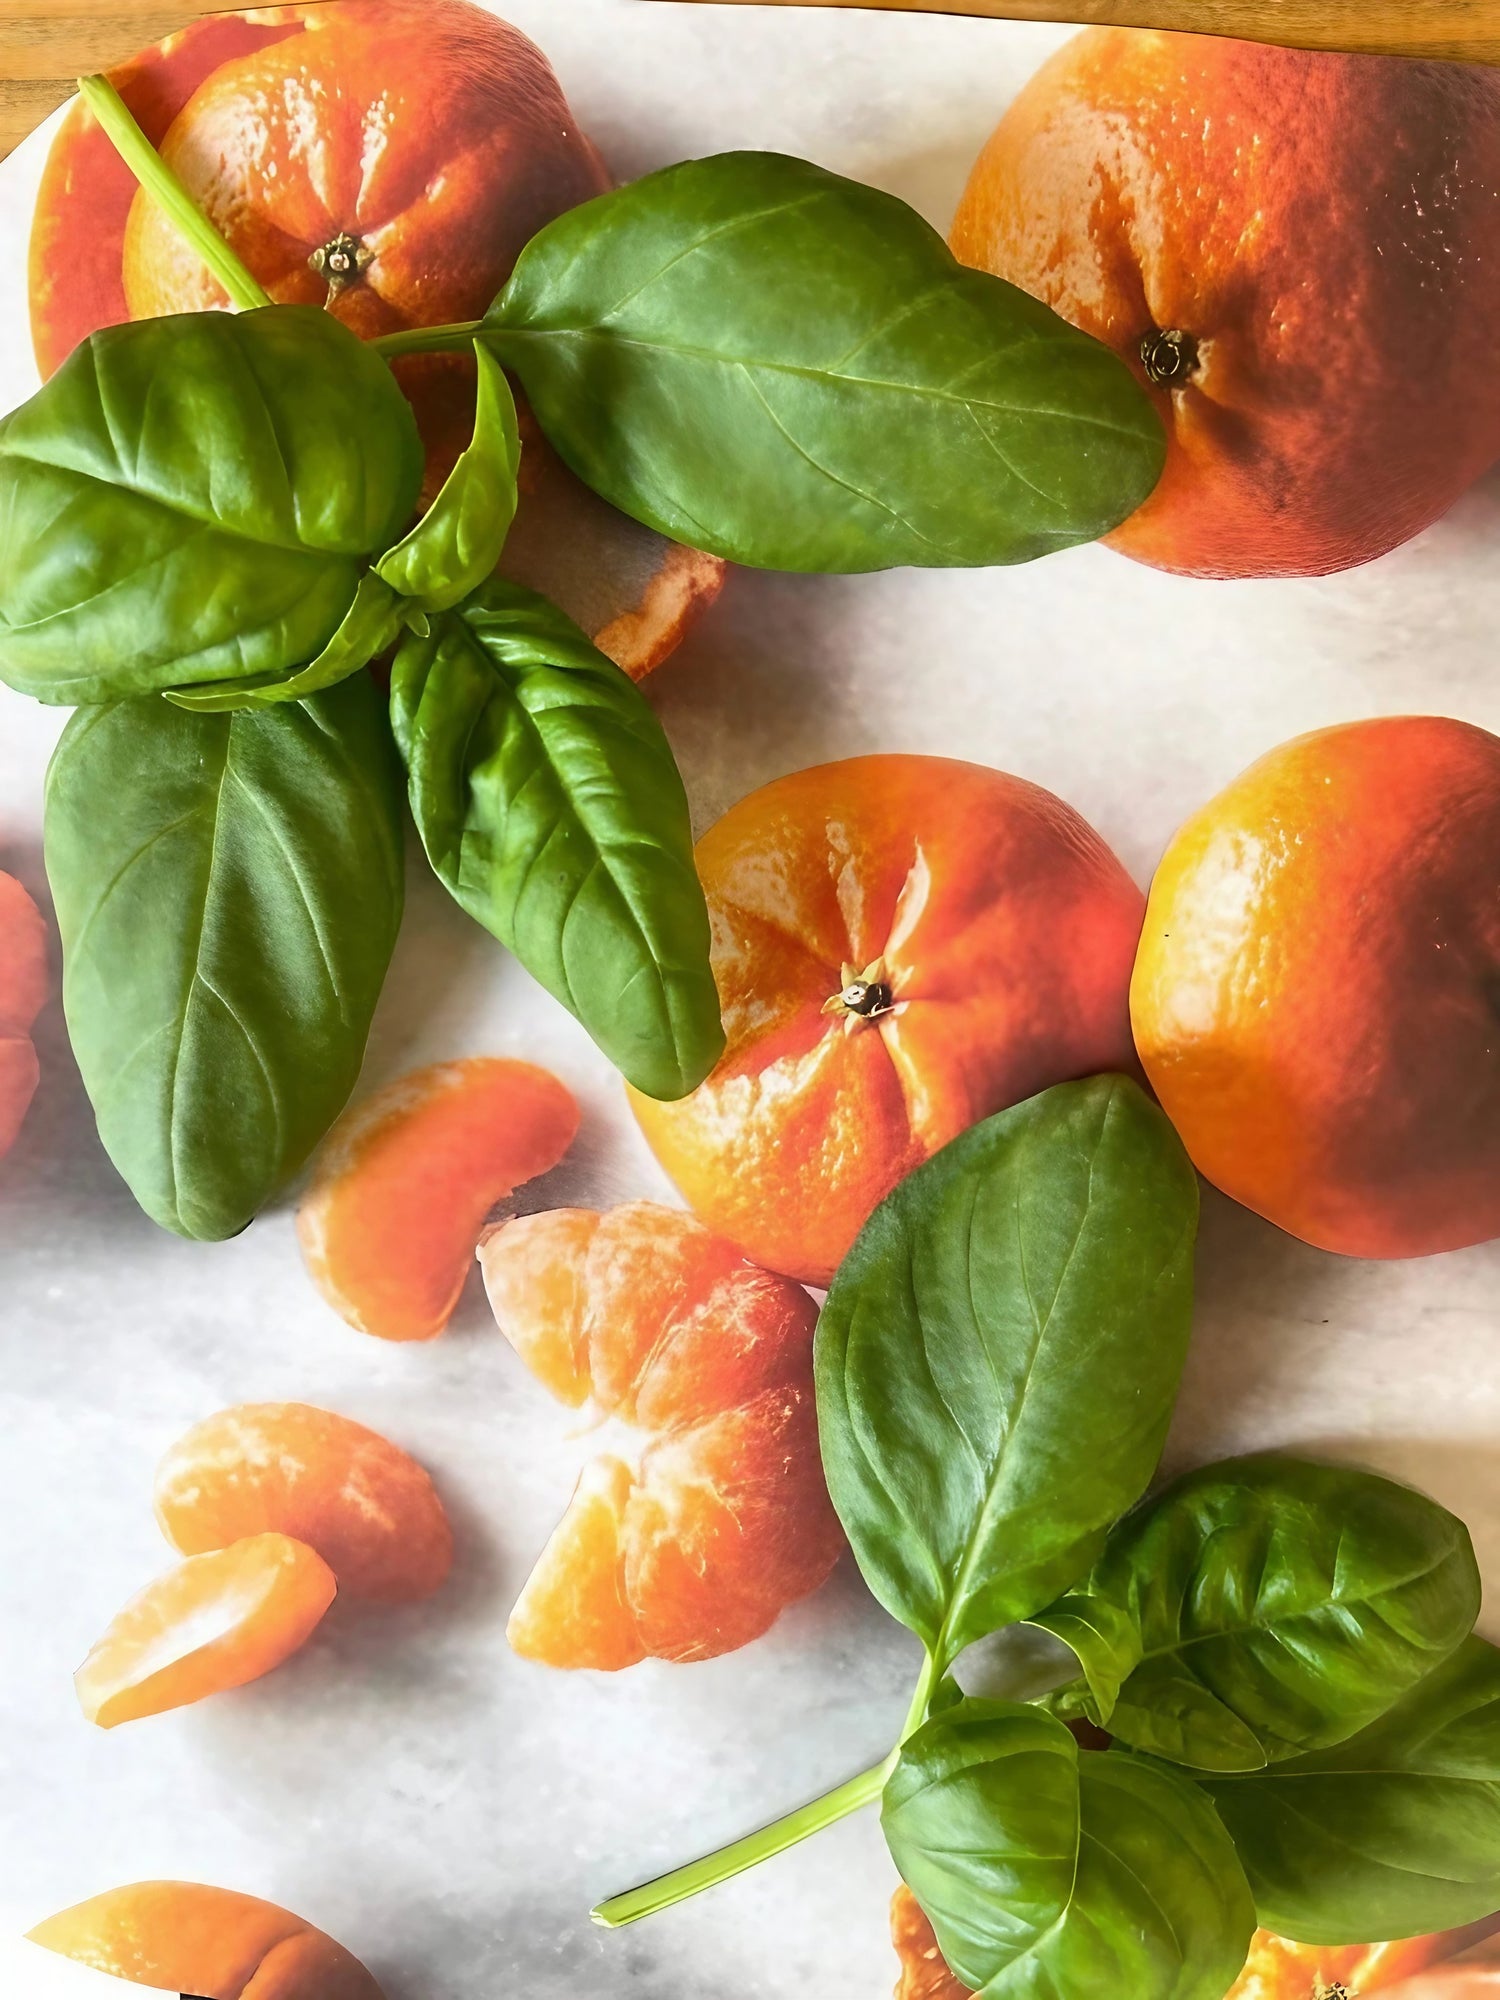 Sliced oranges garnished with Italian basil leaves on a chopping board